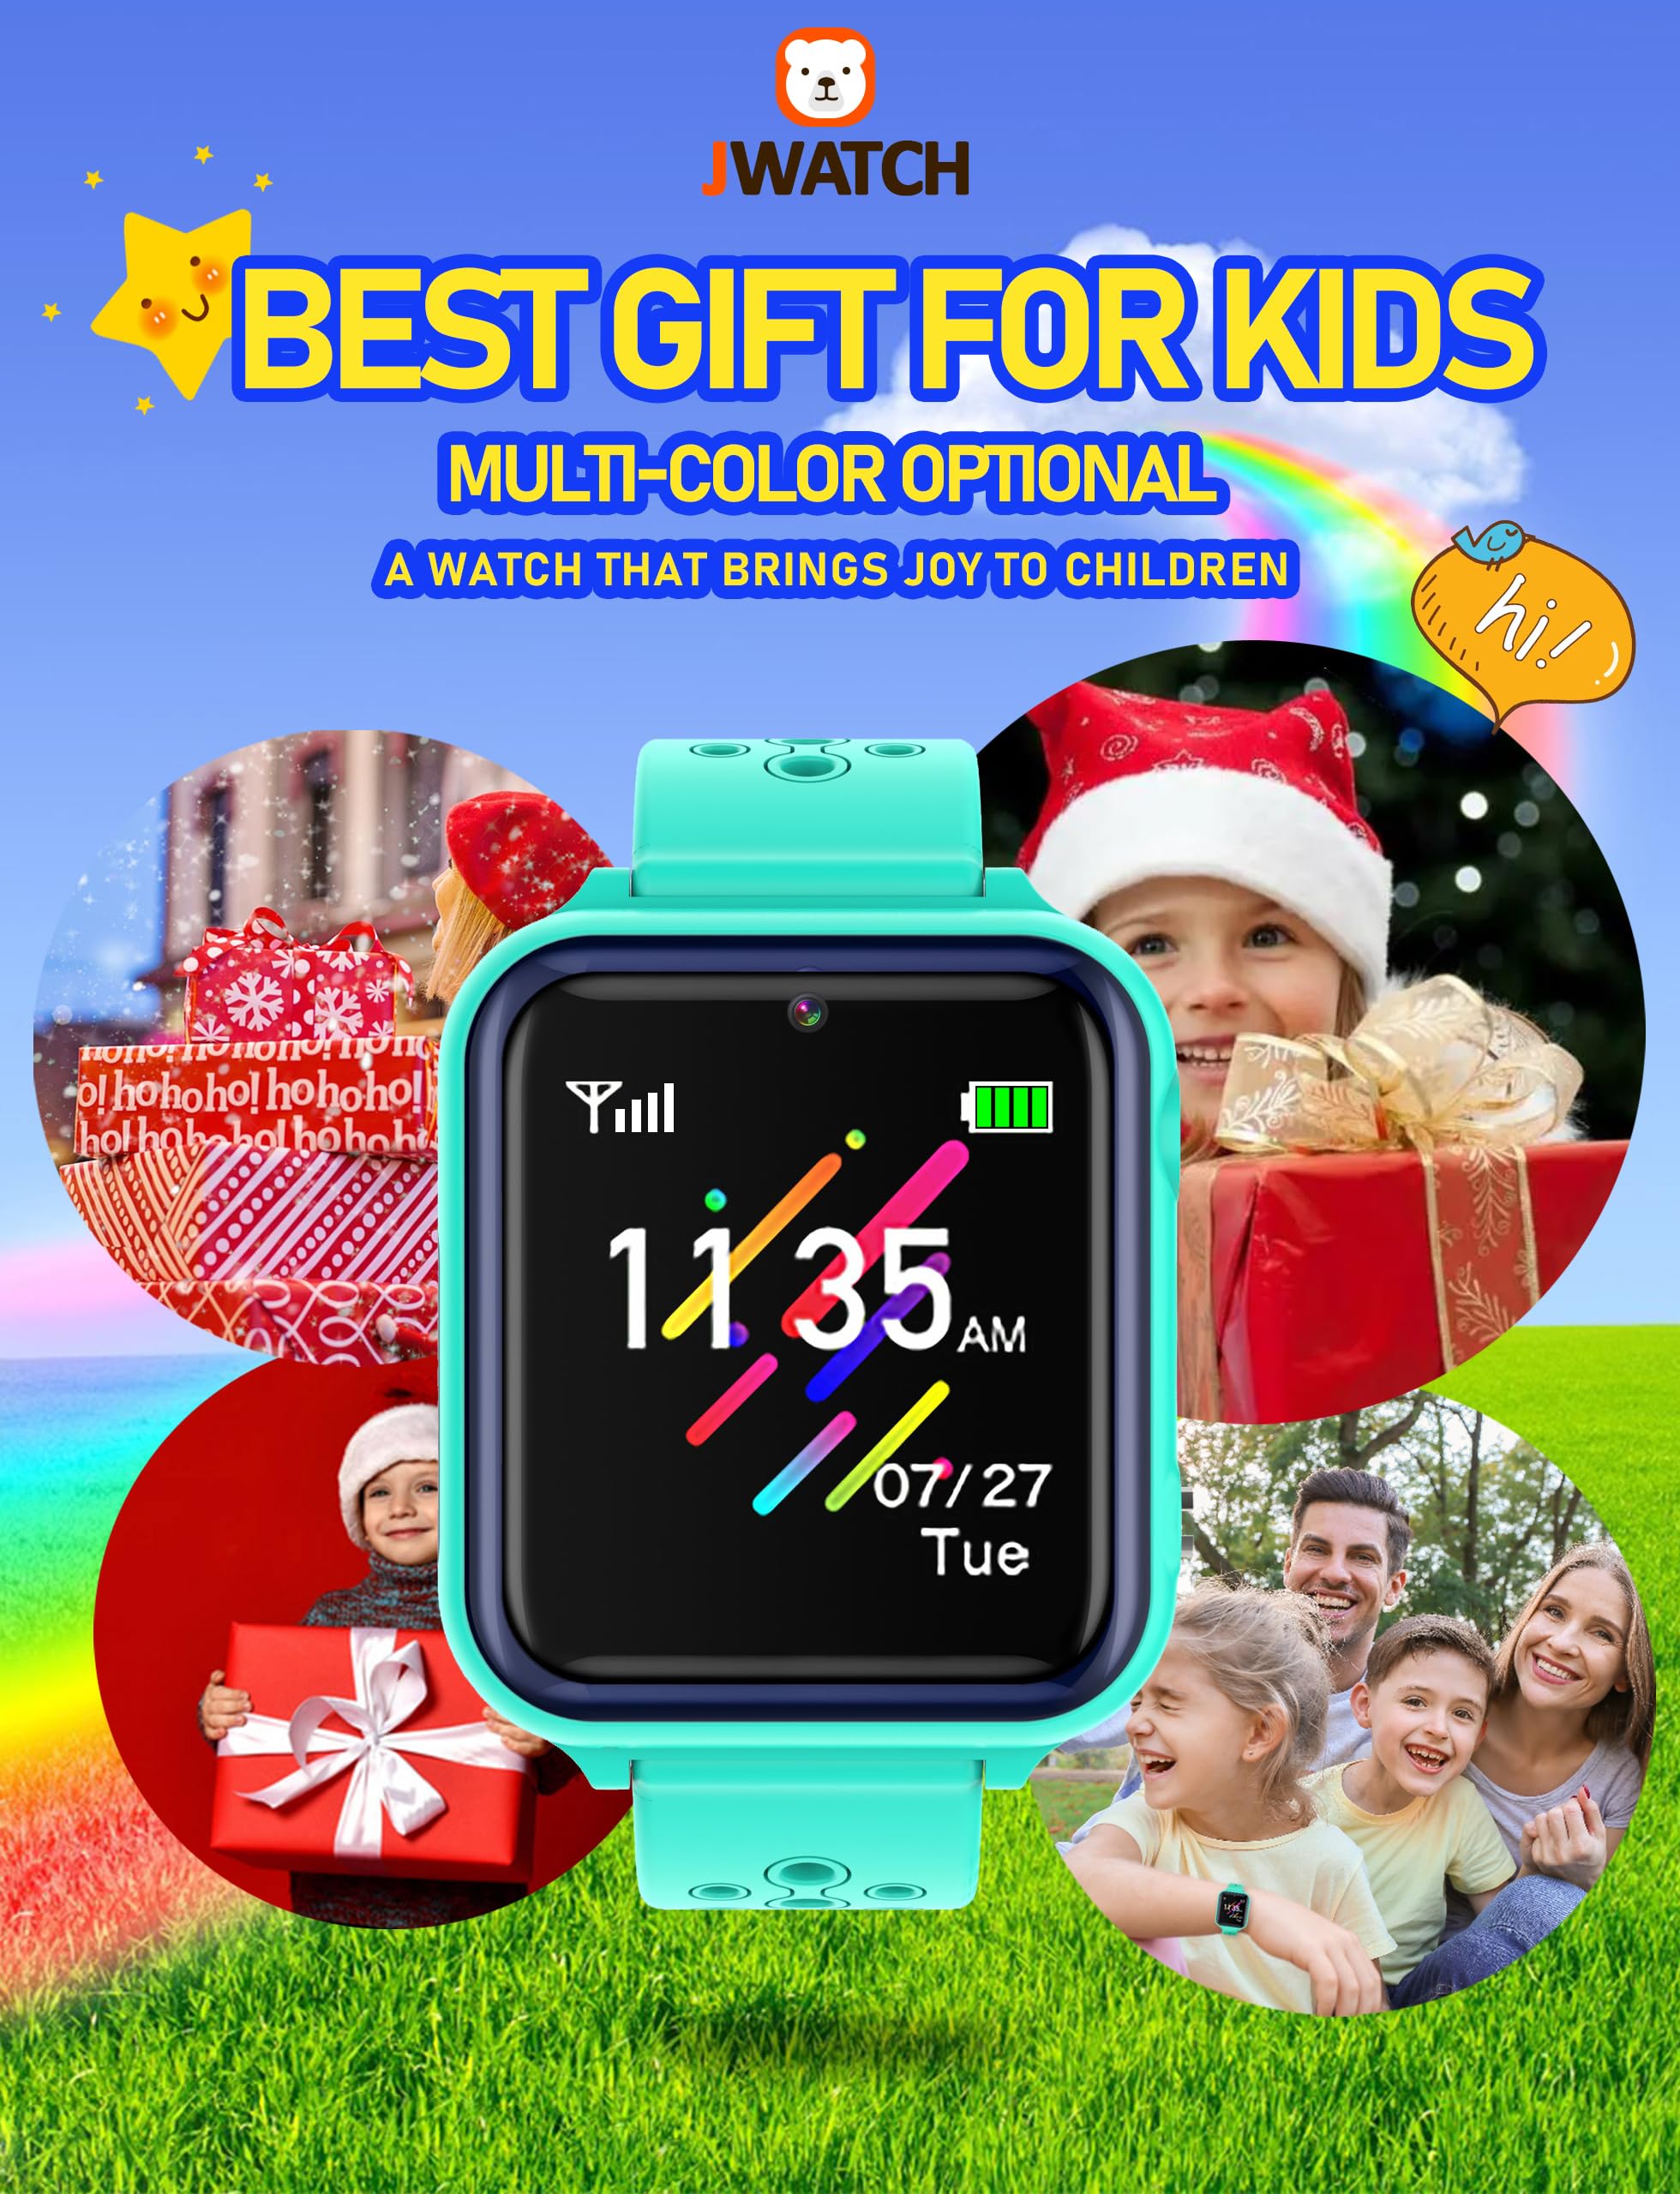 Jwatch Kids Smart Watch Phone Sos with 10 Stories 16 Puzzle Games Stopwatch Alarm Clock Kids Watches Toys for 6 7 8 9 10 11 12 Boys Girls Gift for Birthday Christmas （Green）…